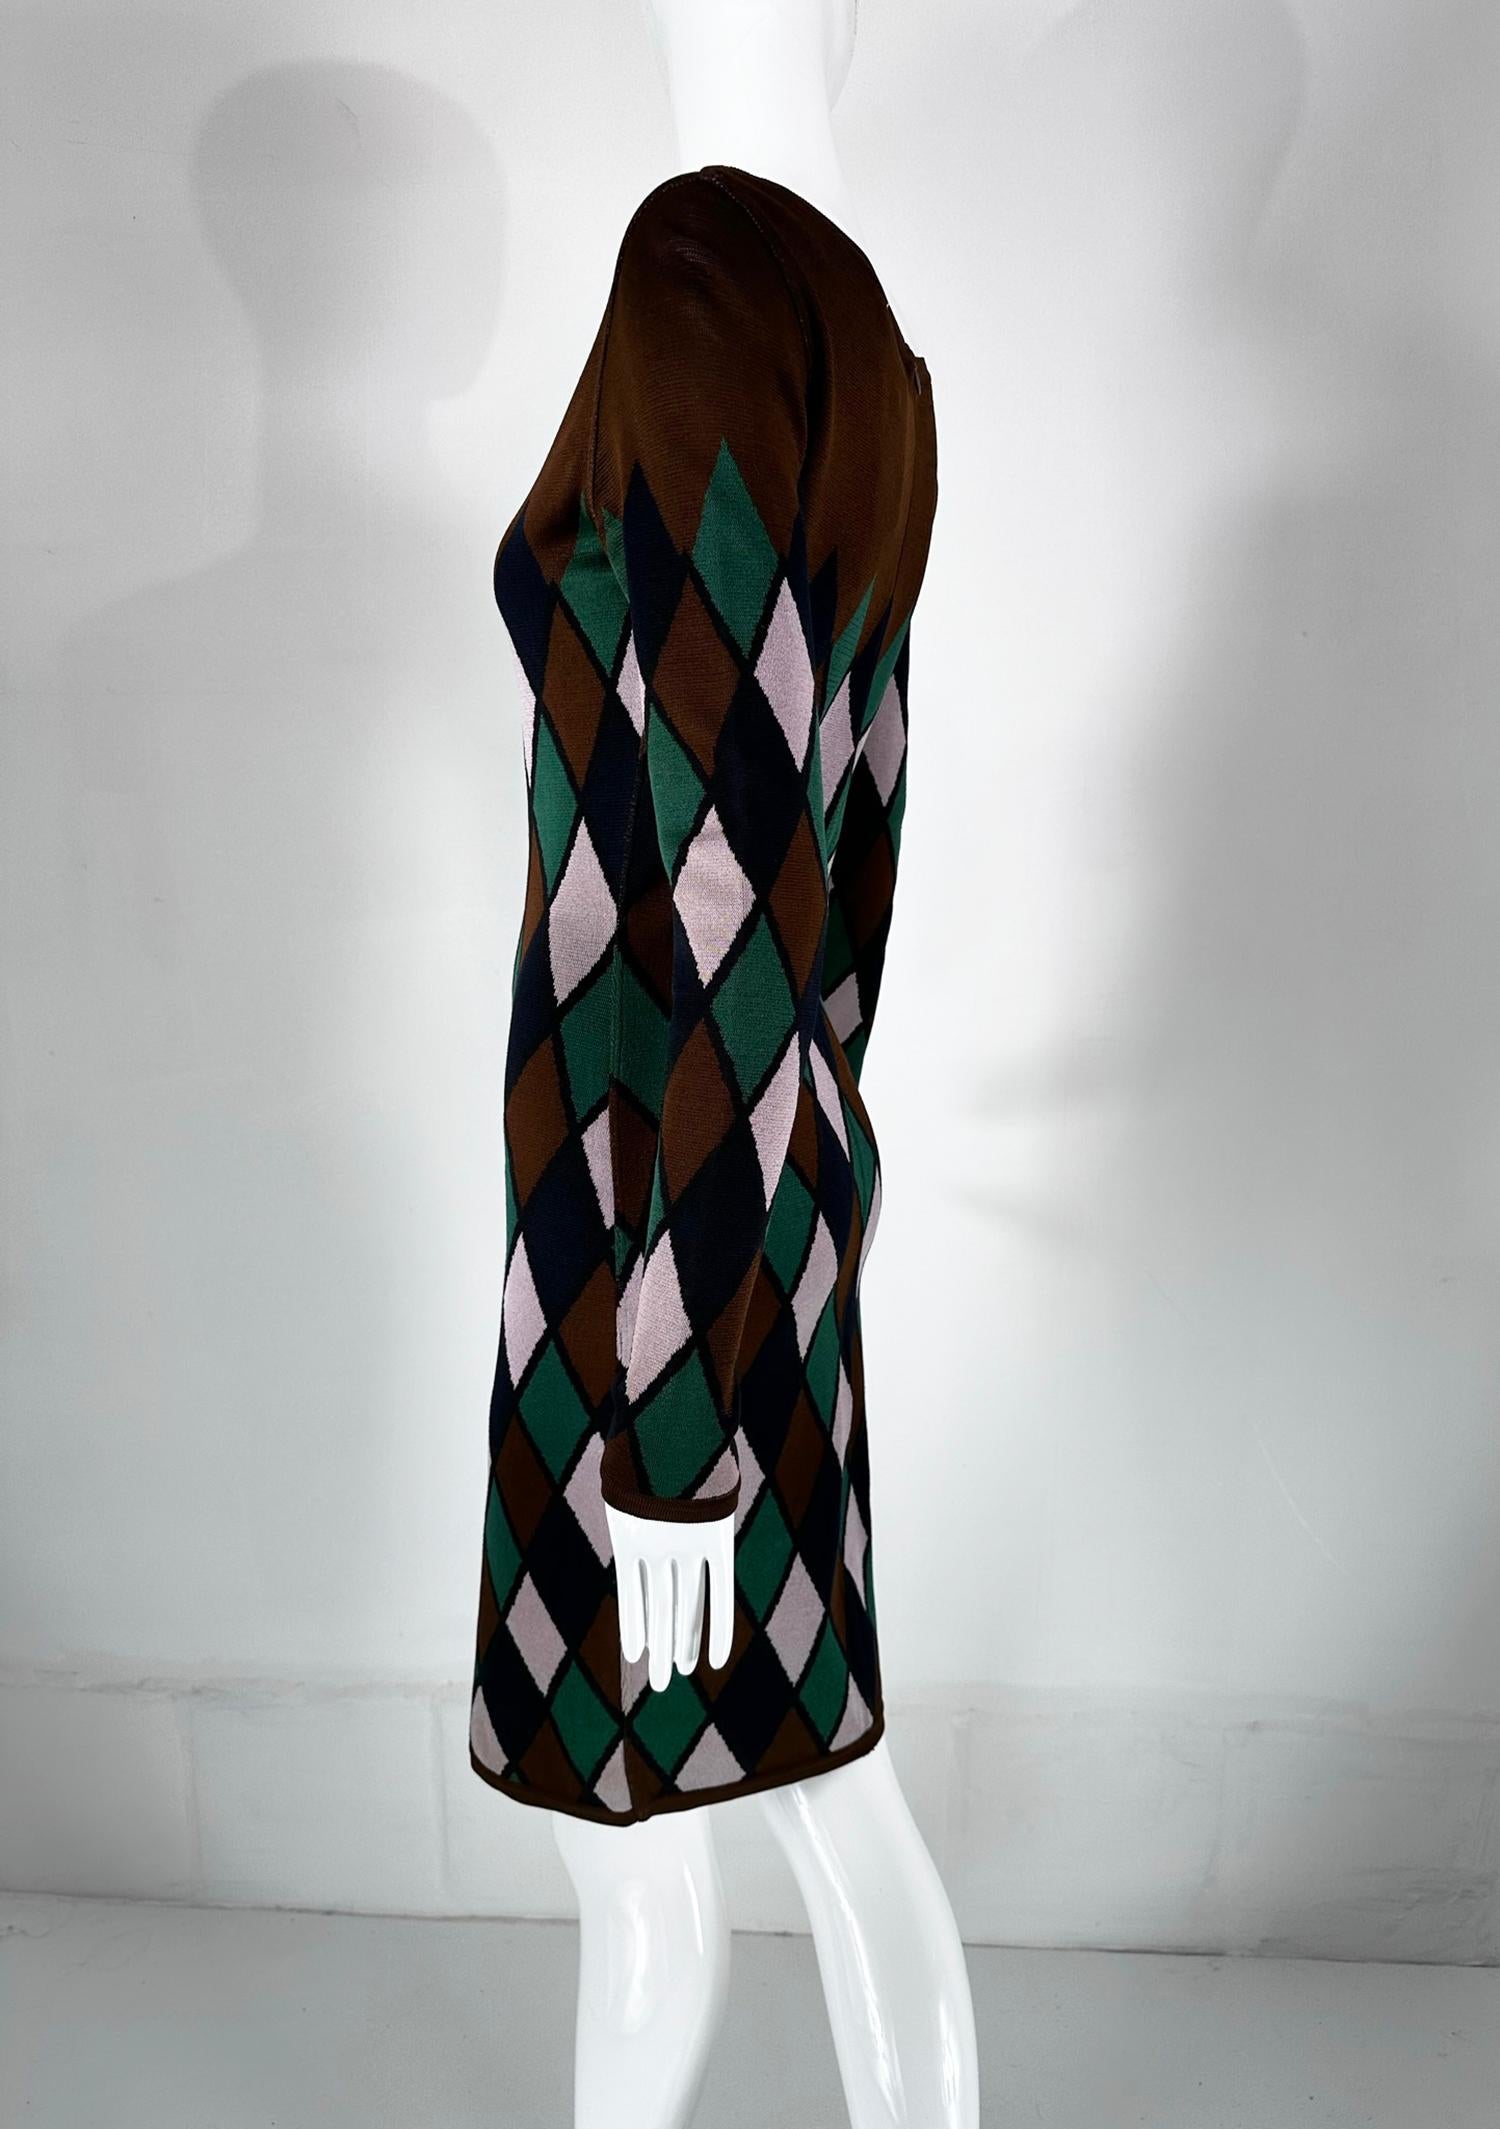 Azzedine Alaia Rare Fall 1992 Brown & Green Argyle Knit Body Con Dress Medium In Good Condition For Sale In West Palm Beach, FL